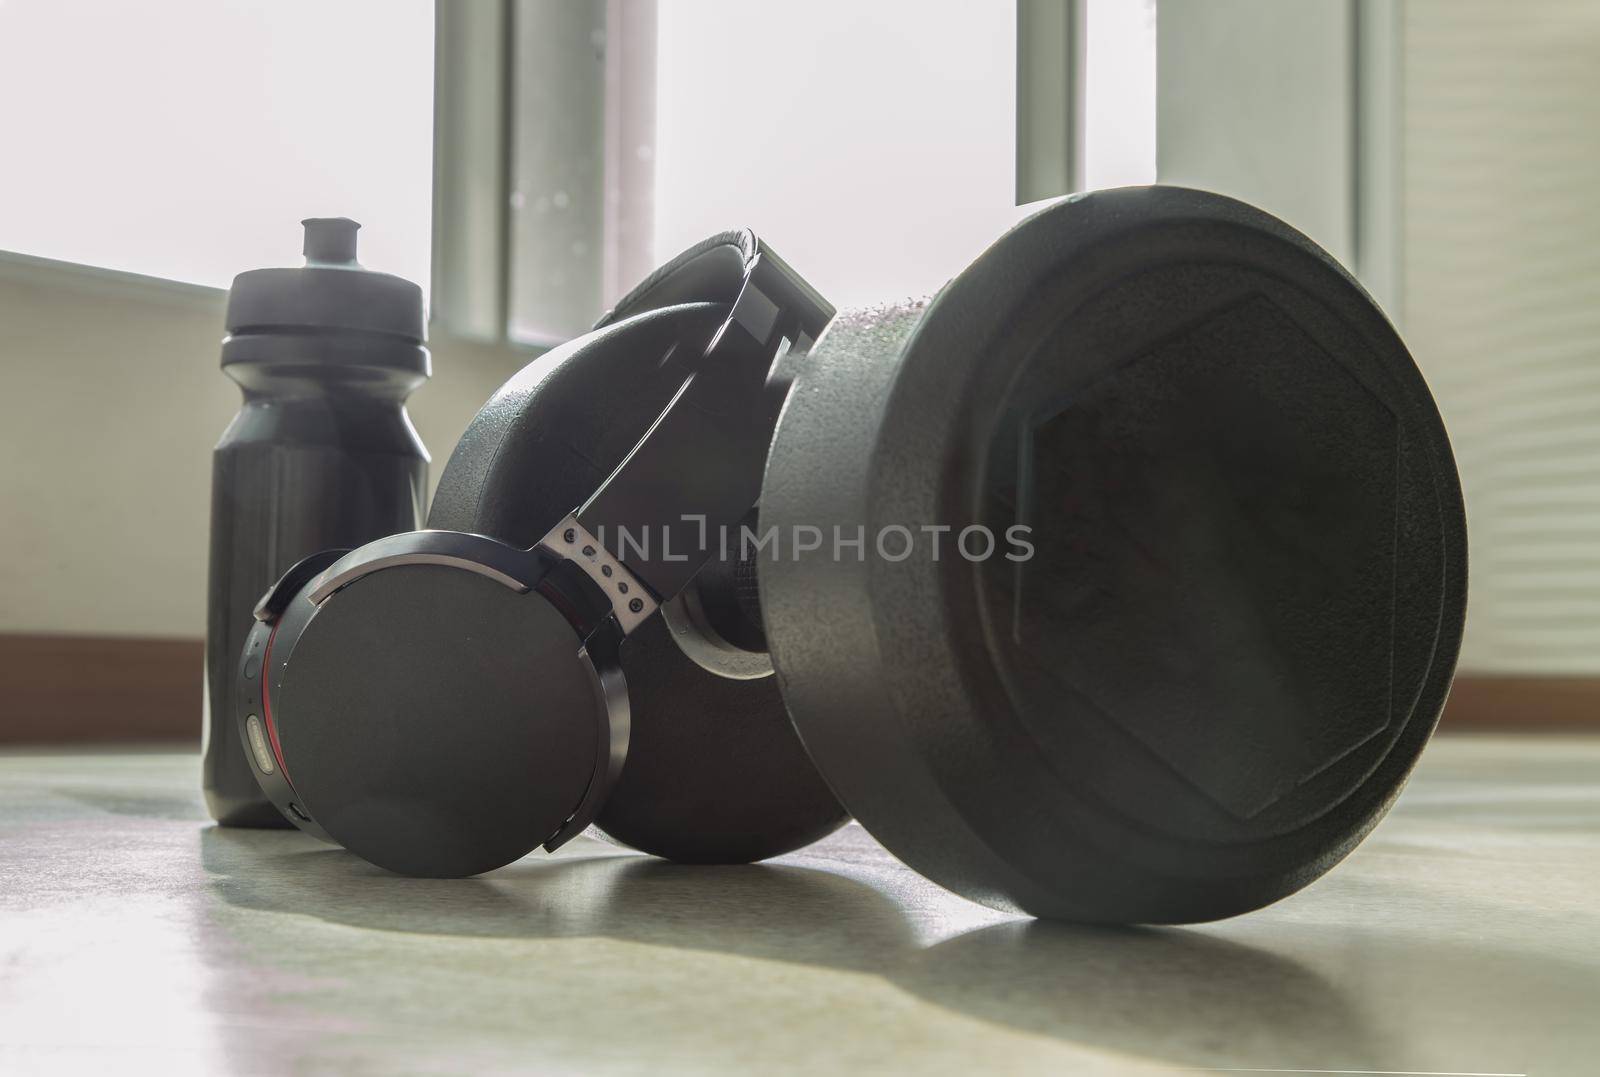 Headphones, Dumbbell and Water bottle for Listening to music while exercising. Copy space, Selective focus.